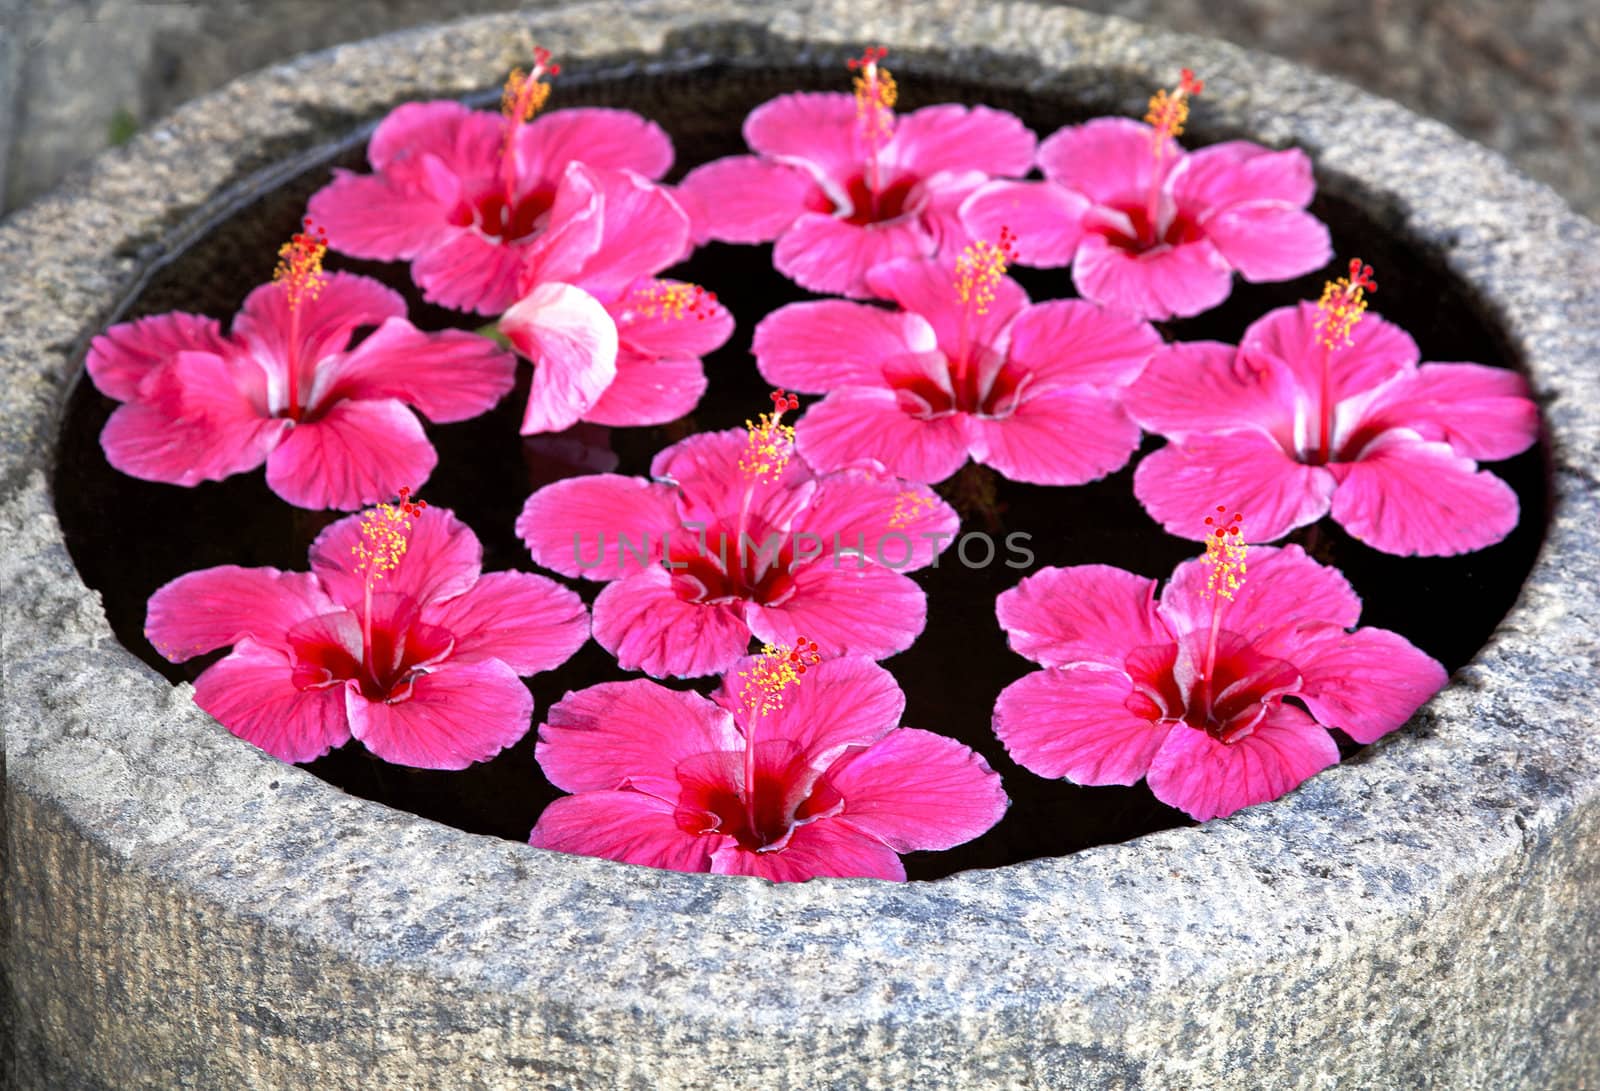 Hibicus Bright pink fluted flower floating on water in a feature outdoor garden vessal pond India, headline space crop margin landscape horizontal